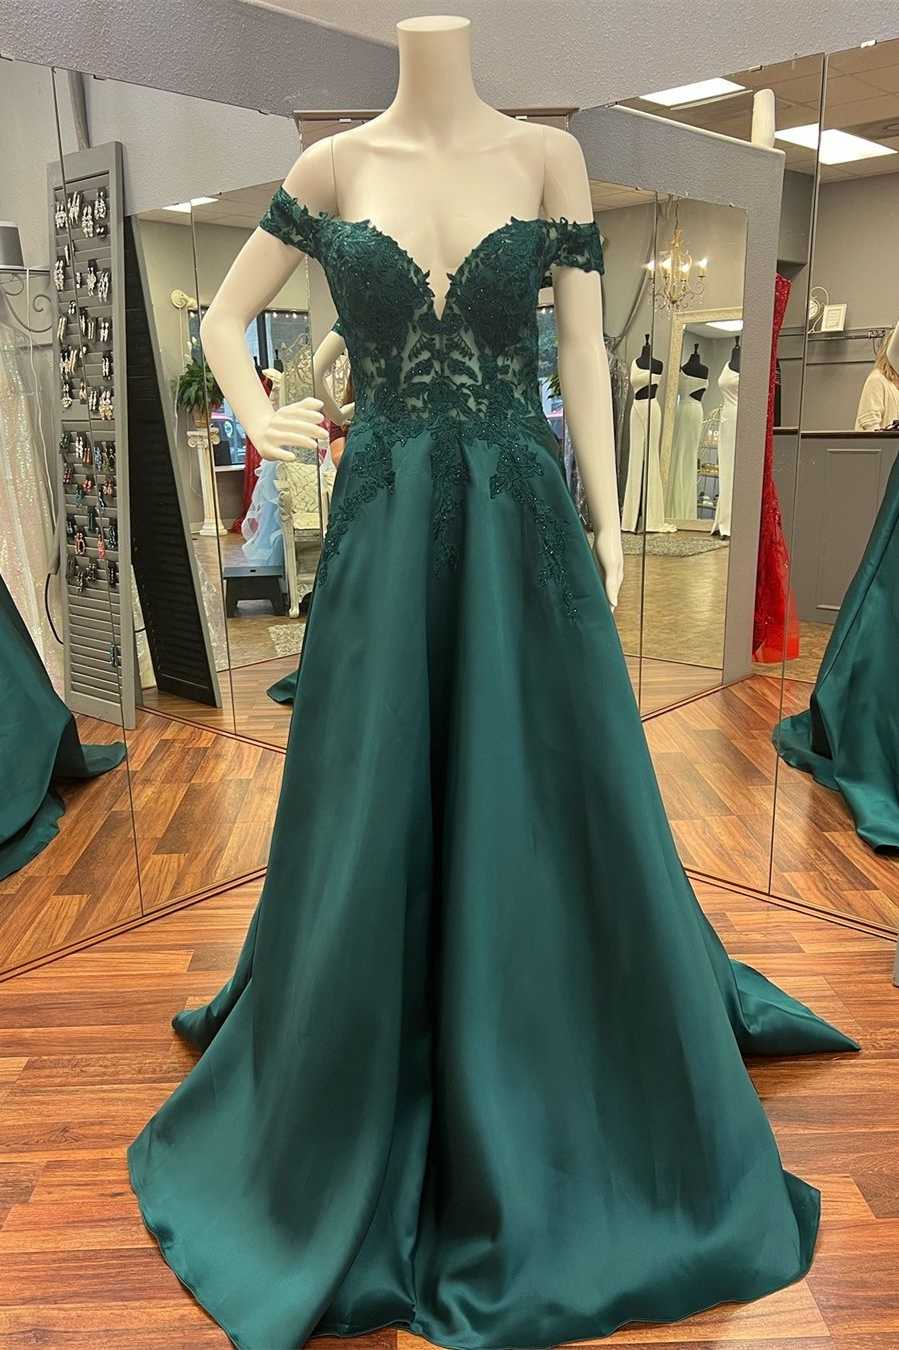 Party Dress Night Out, Hunter Green Lace Off-the-Shoulder A-Line Long Prom Dress